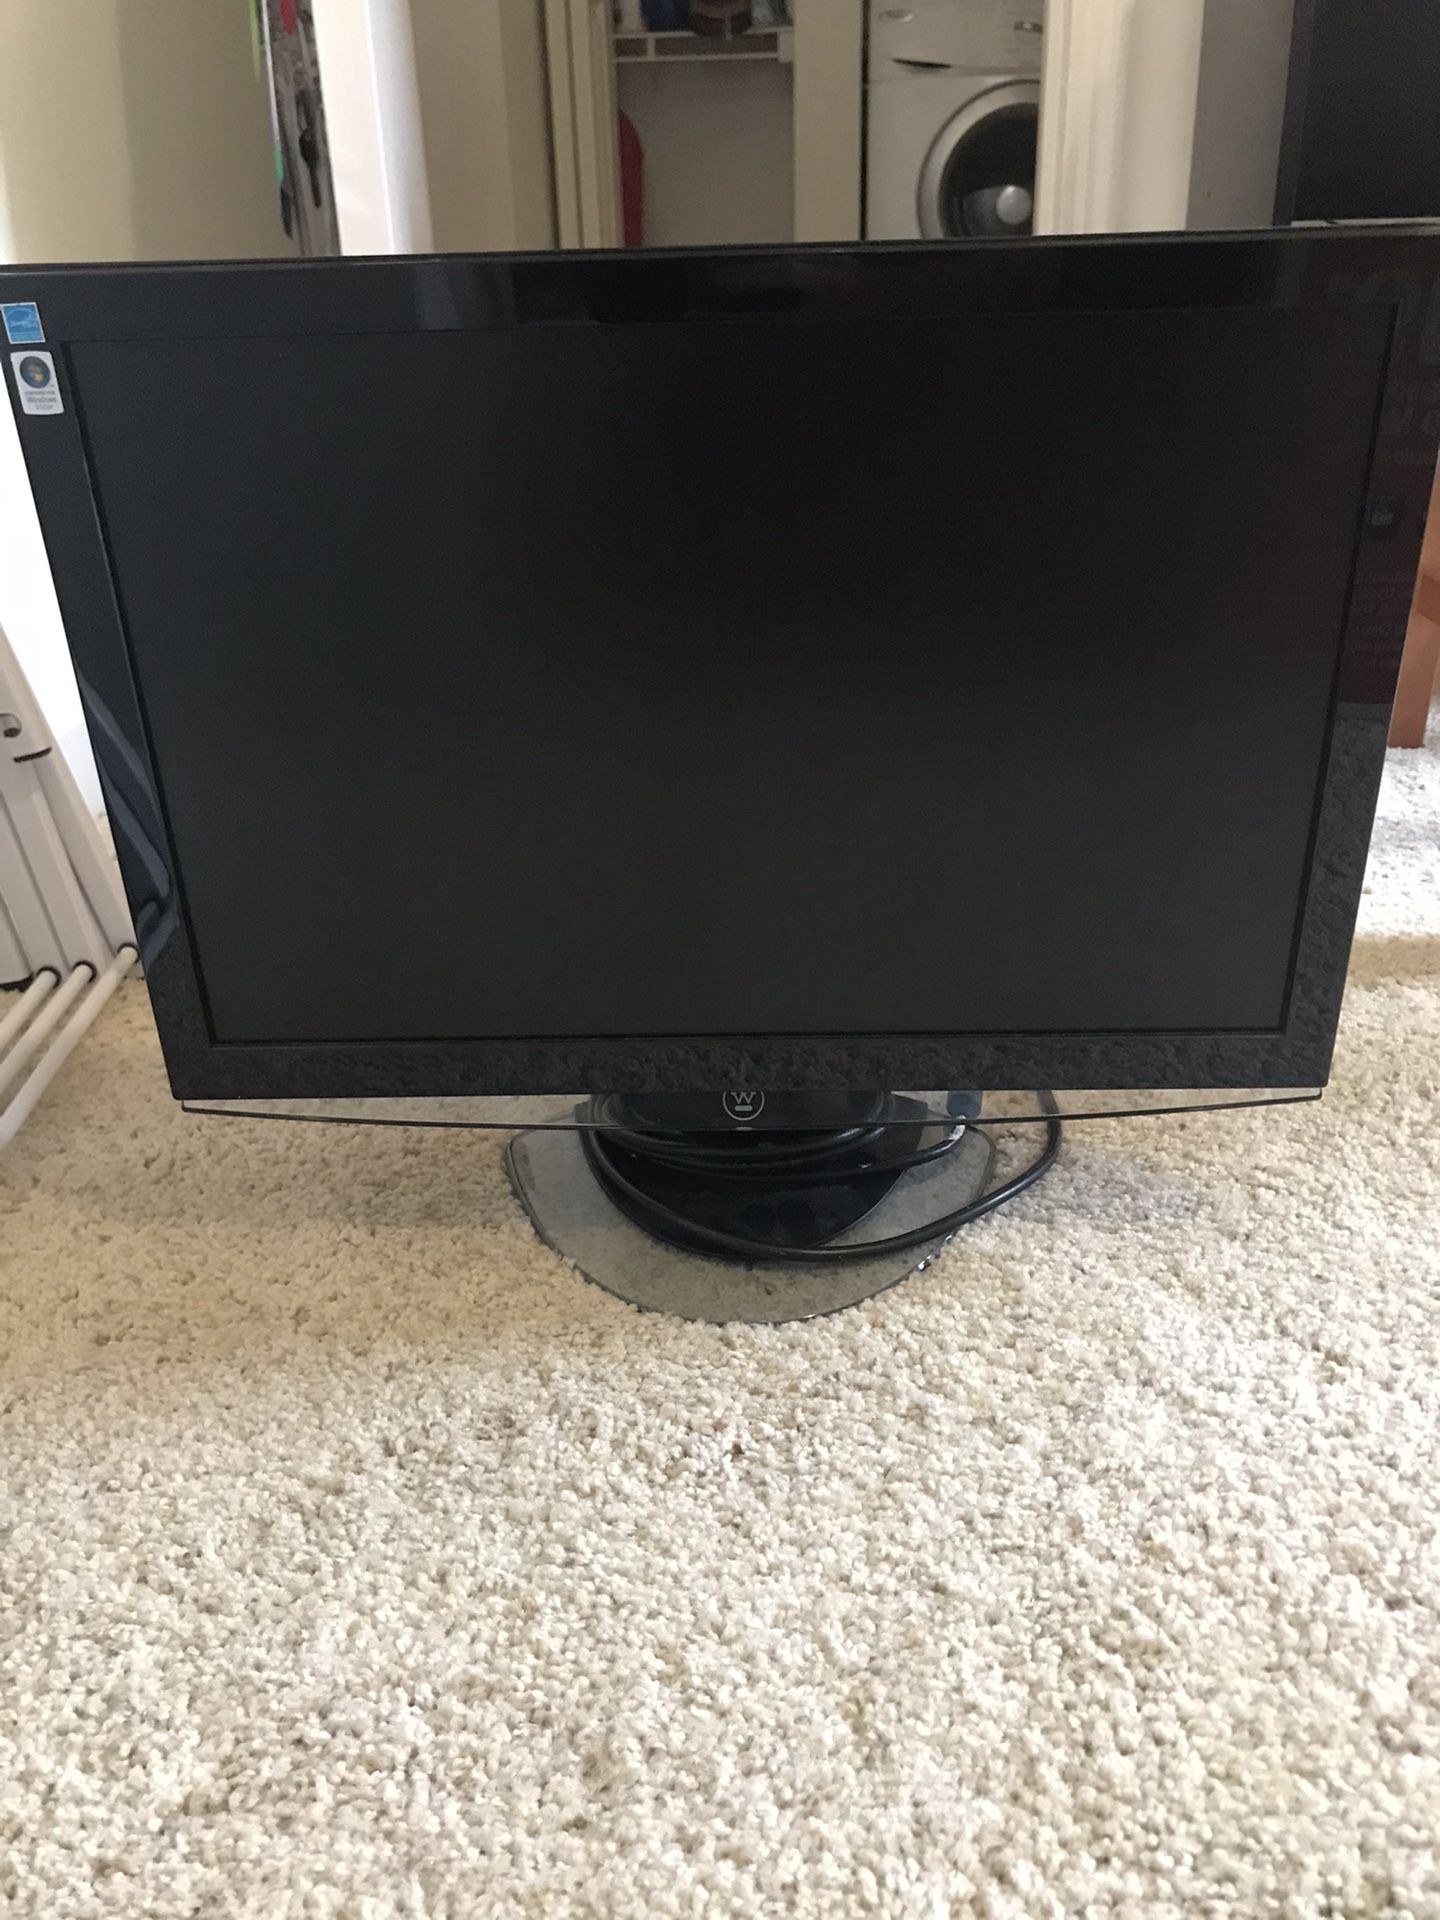 External Monitor (19 Inches)